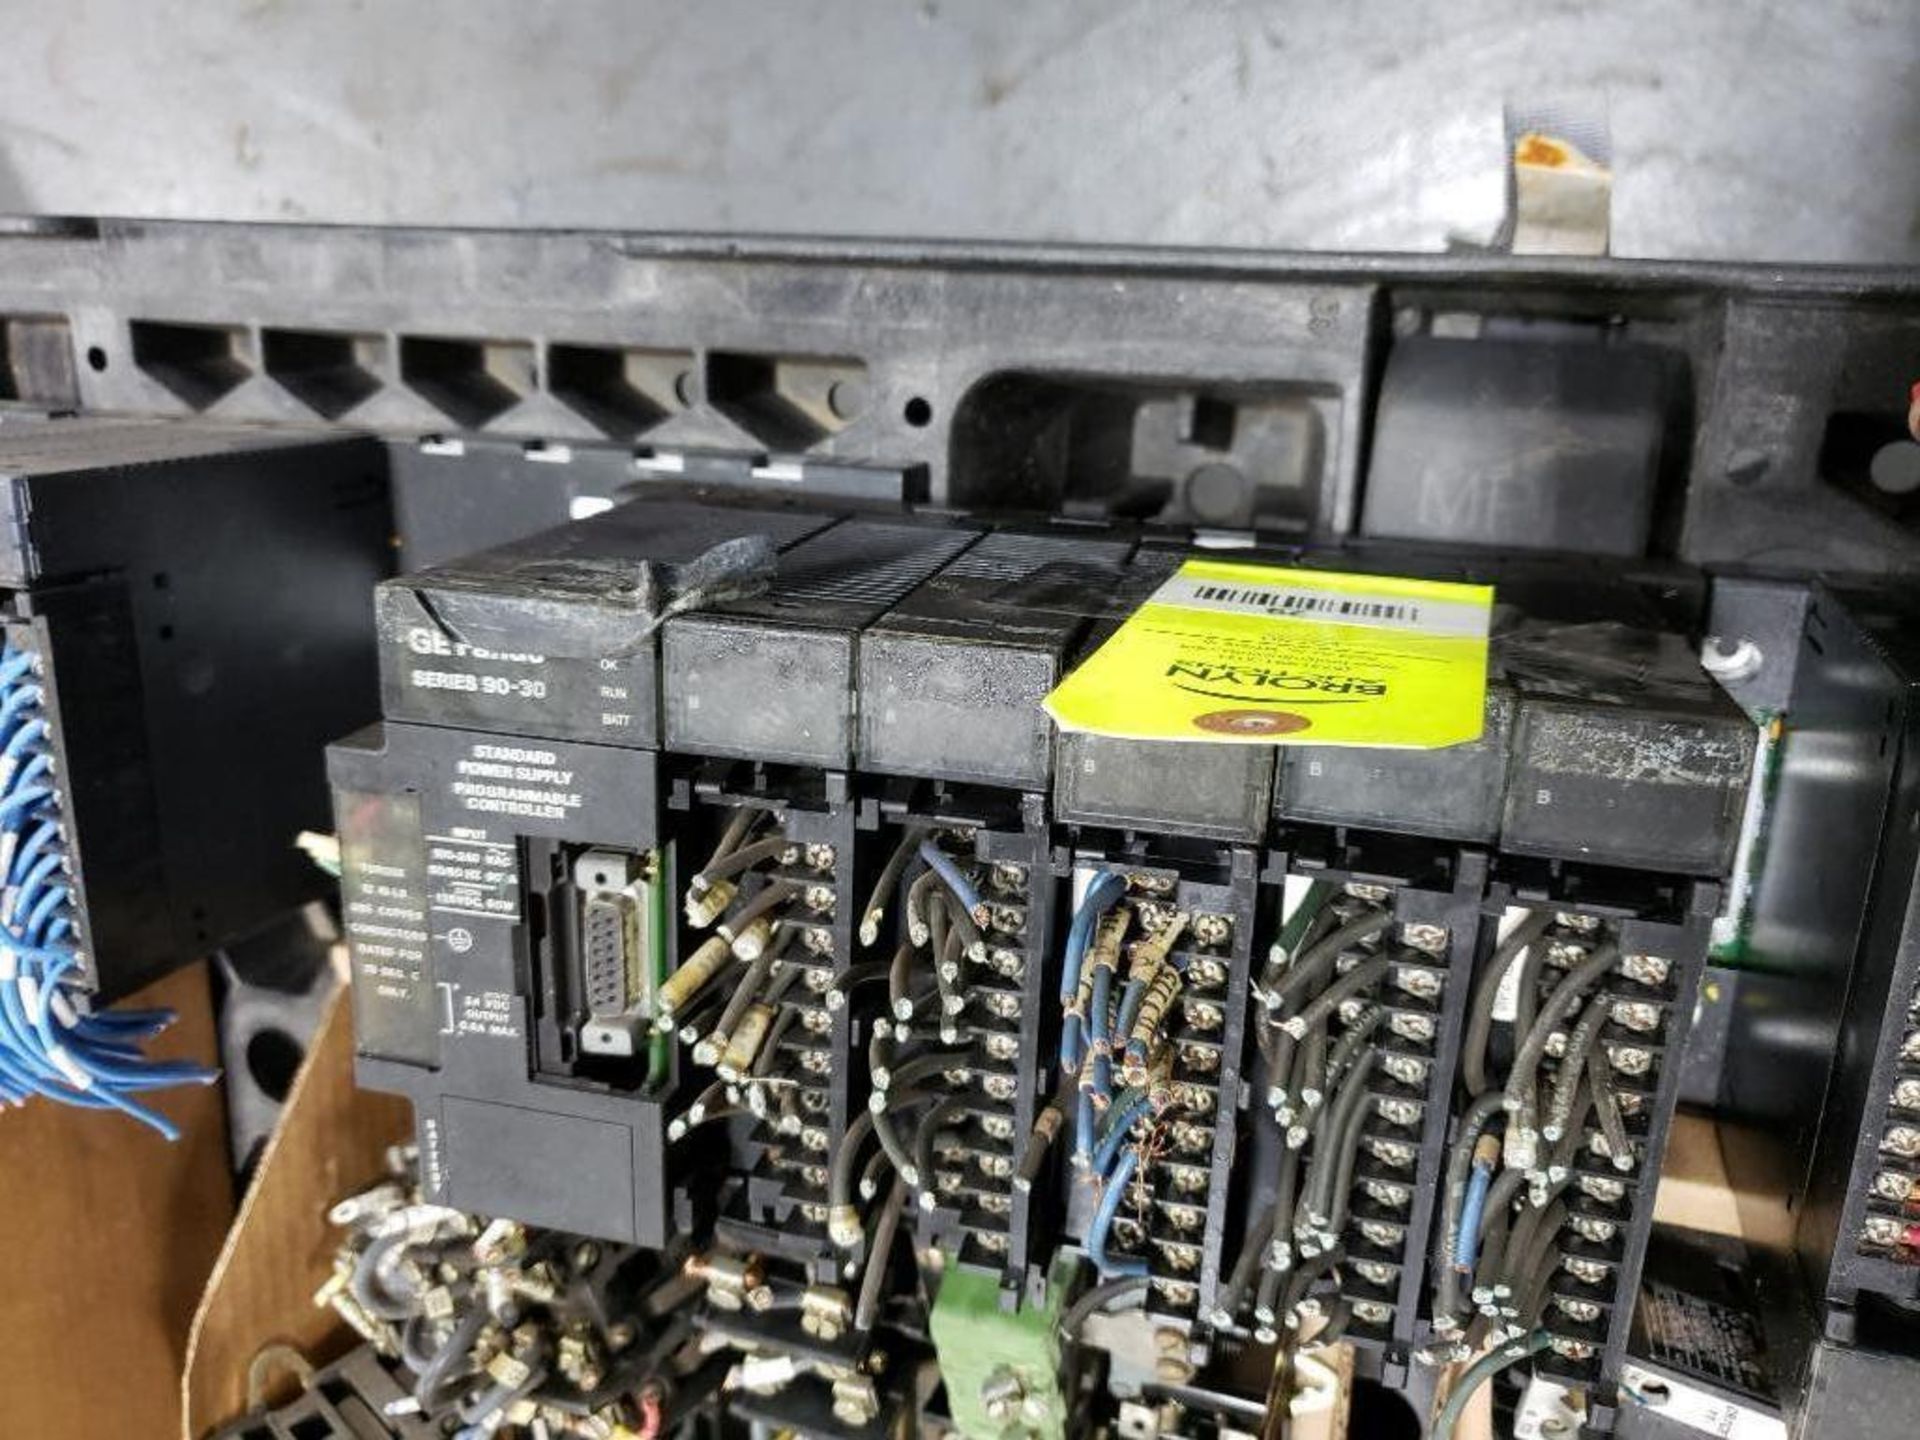 Qty 3 - GE Fanuc PLC racks with cards. - Image 2 of 9